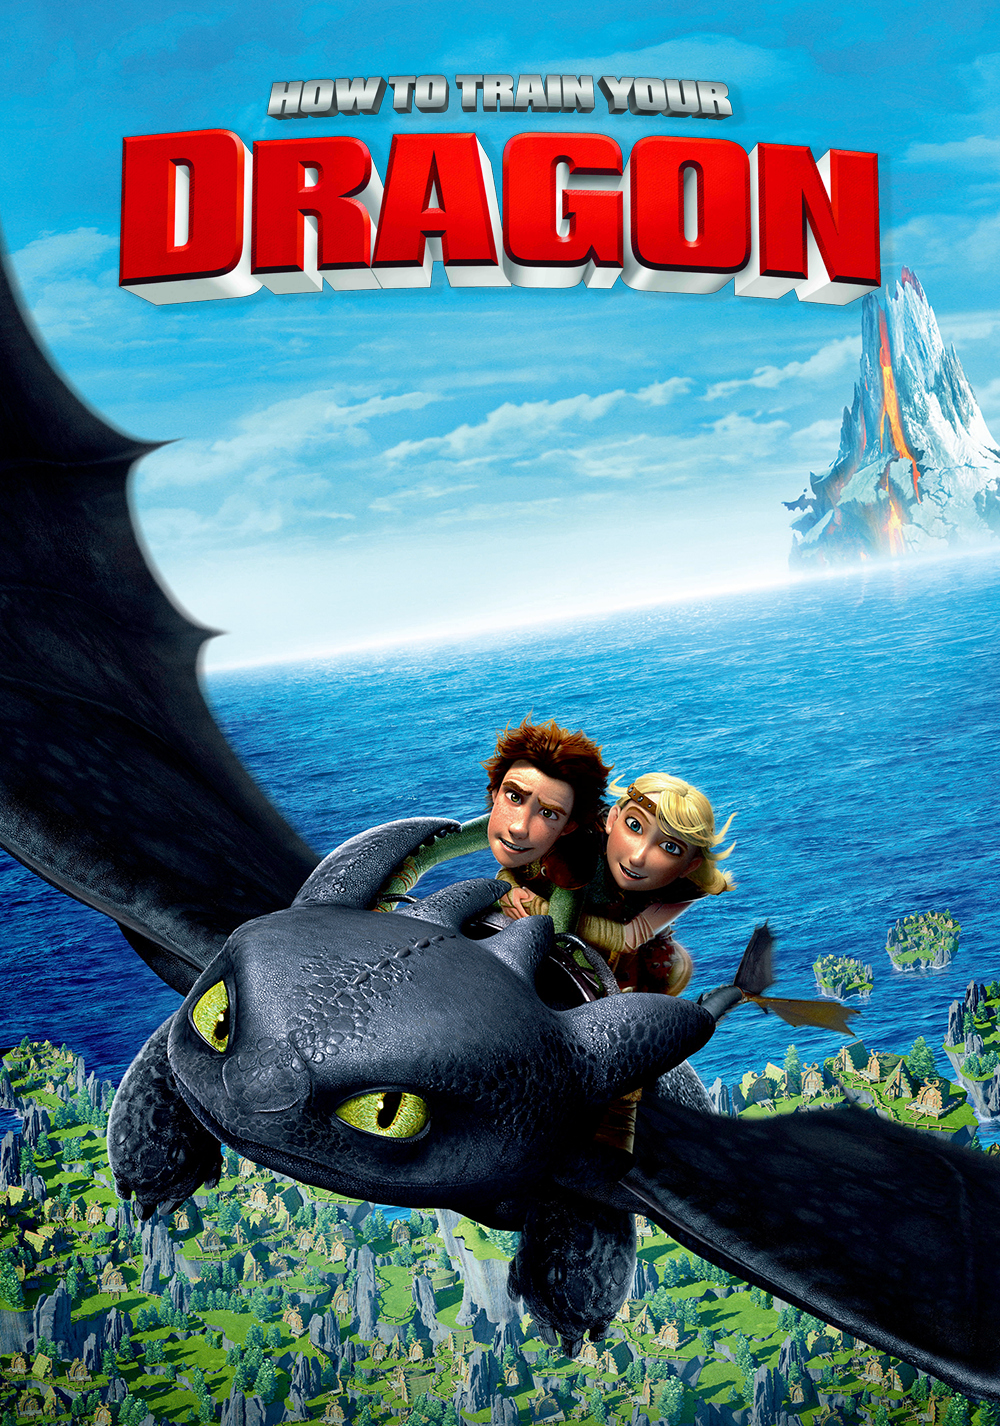 FREE Movie: How To Train Your Dragon — The Newtown Theatre